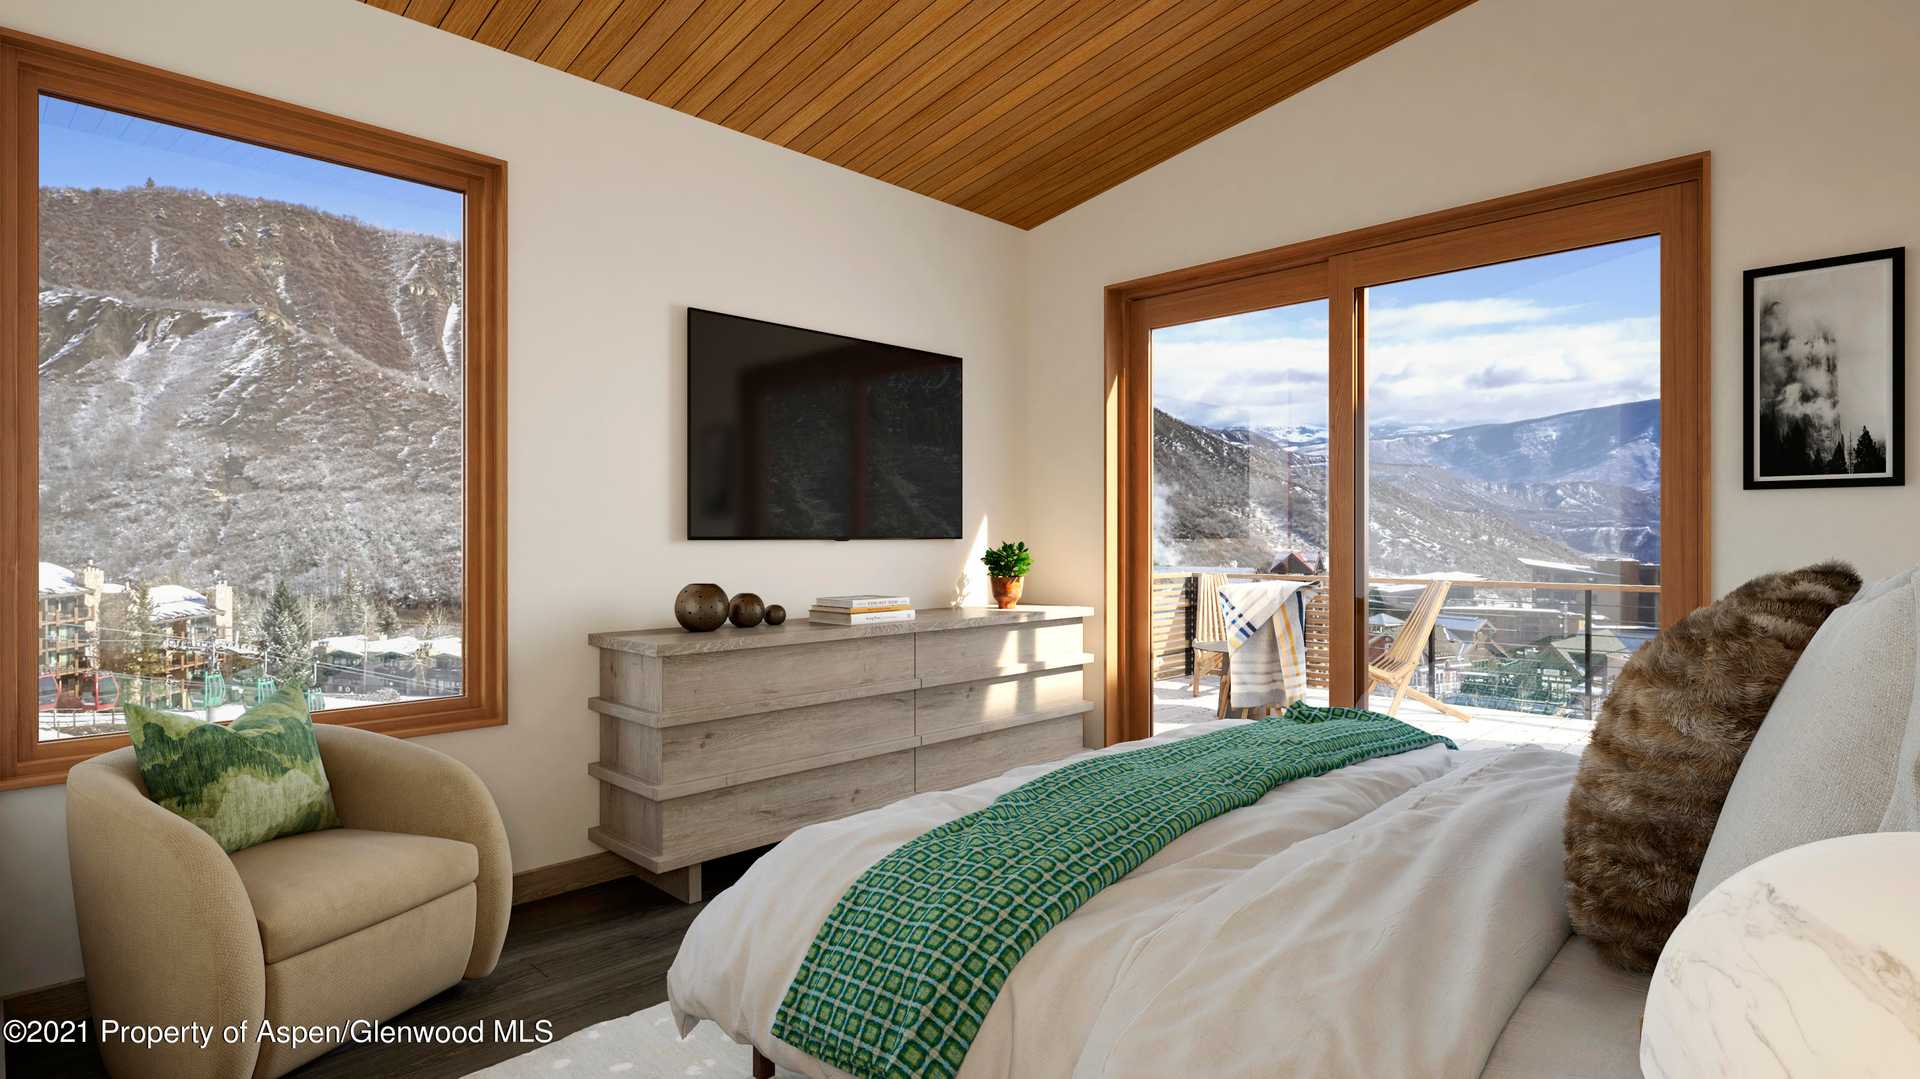 House in Snowmass Village, Colorado 11052506